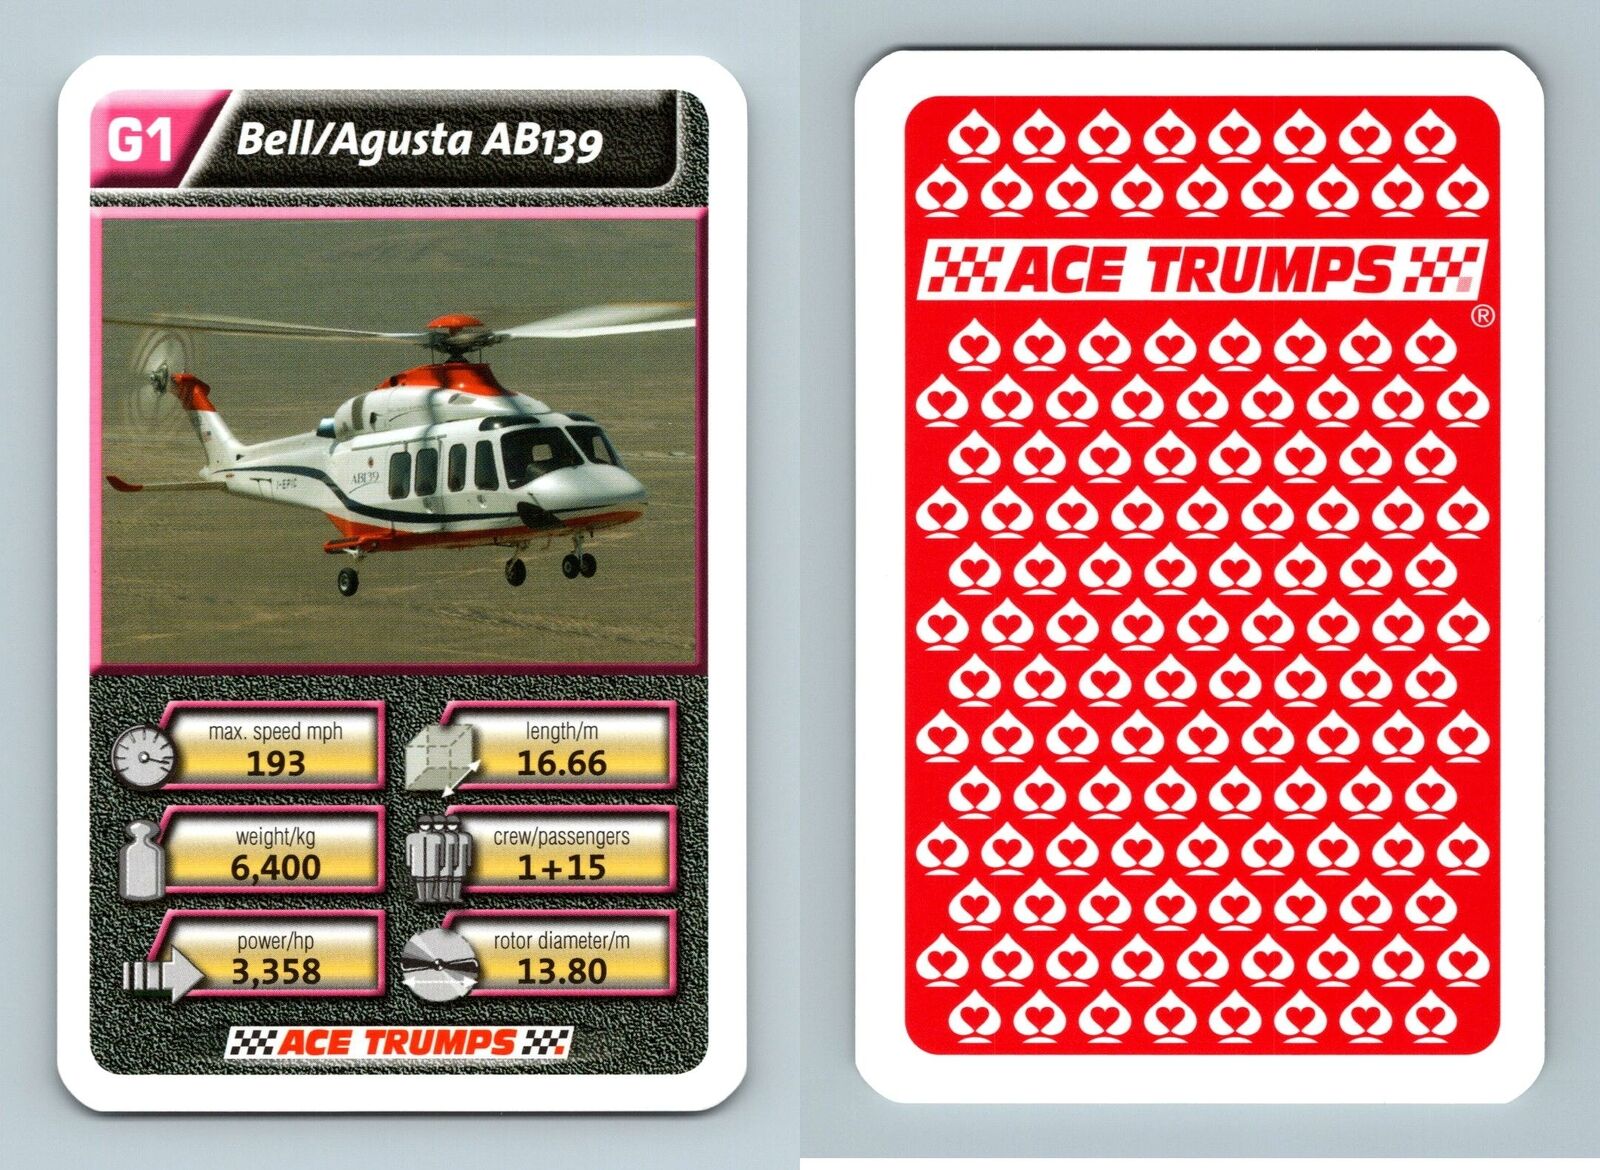 Bell/Agusta AB139 - Helicopters 2008 Ace Trumps Card